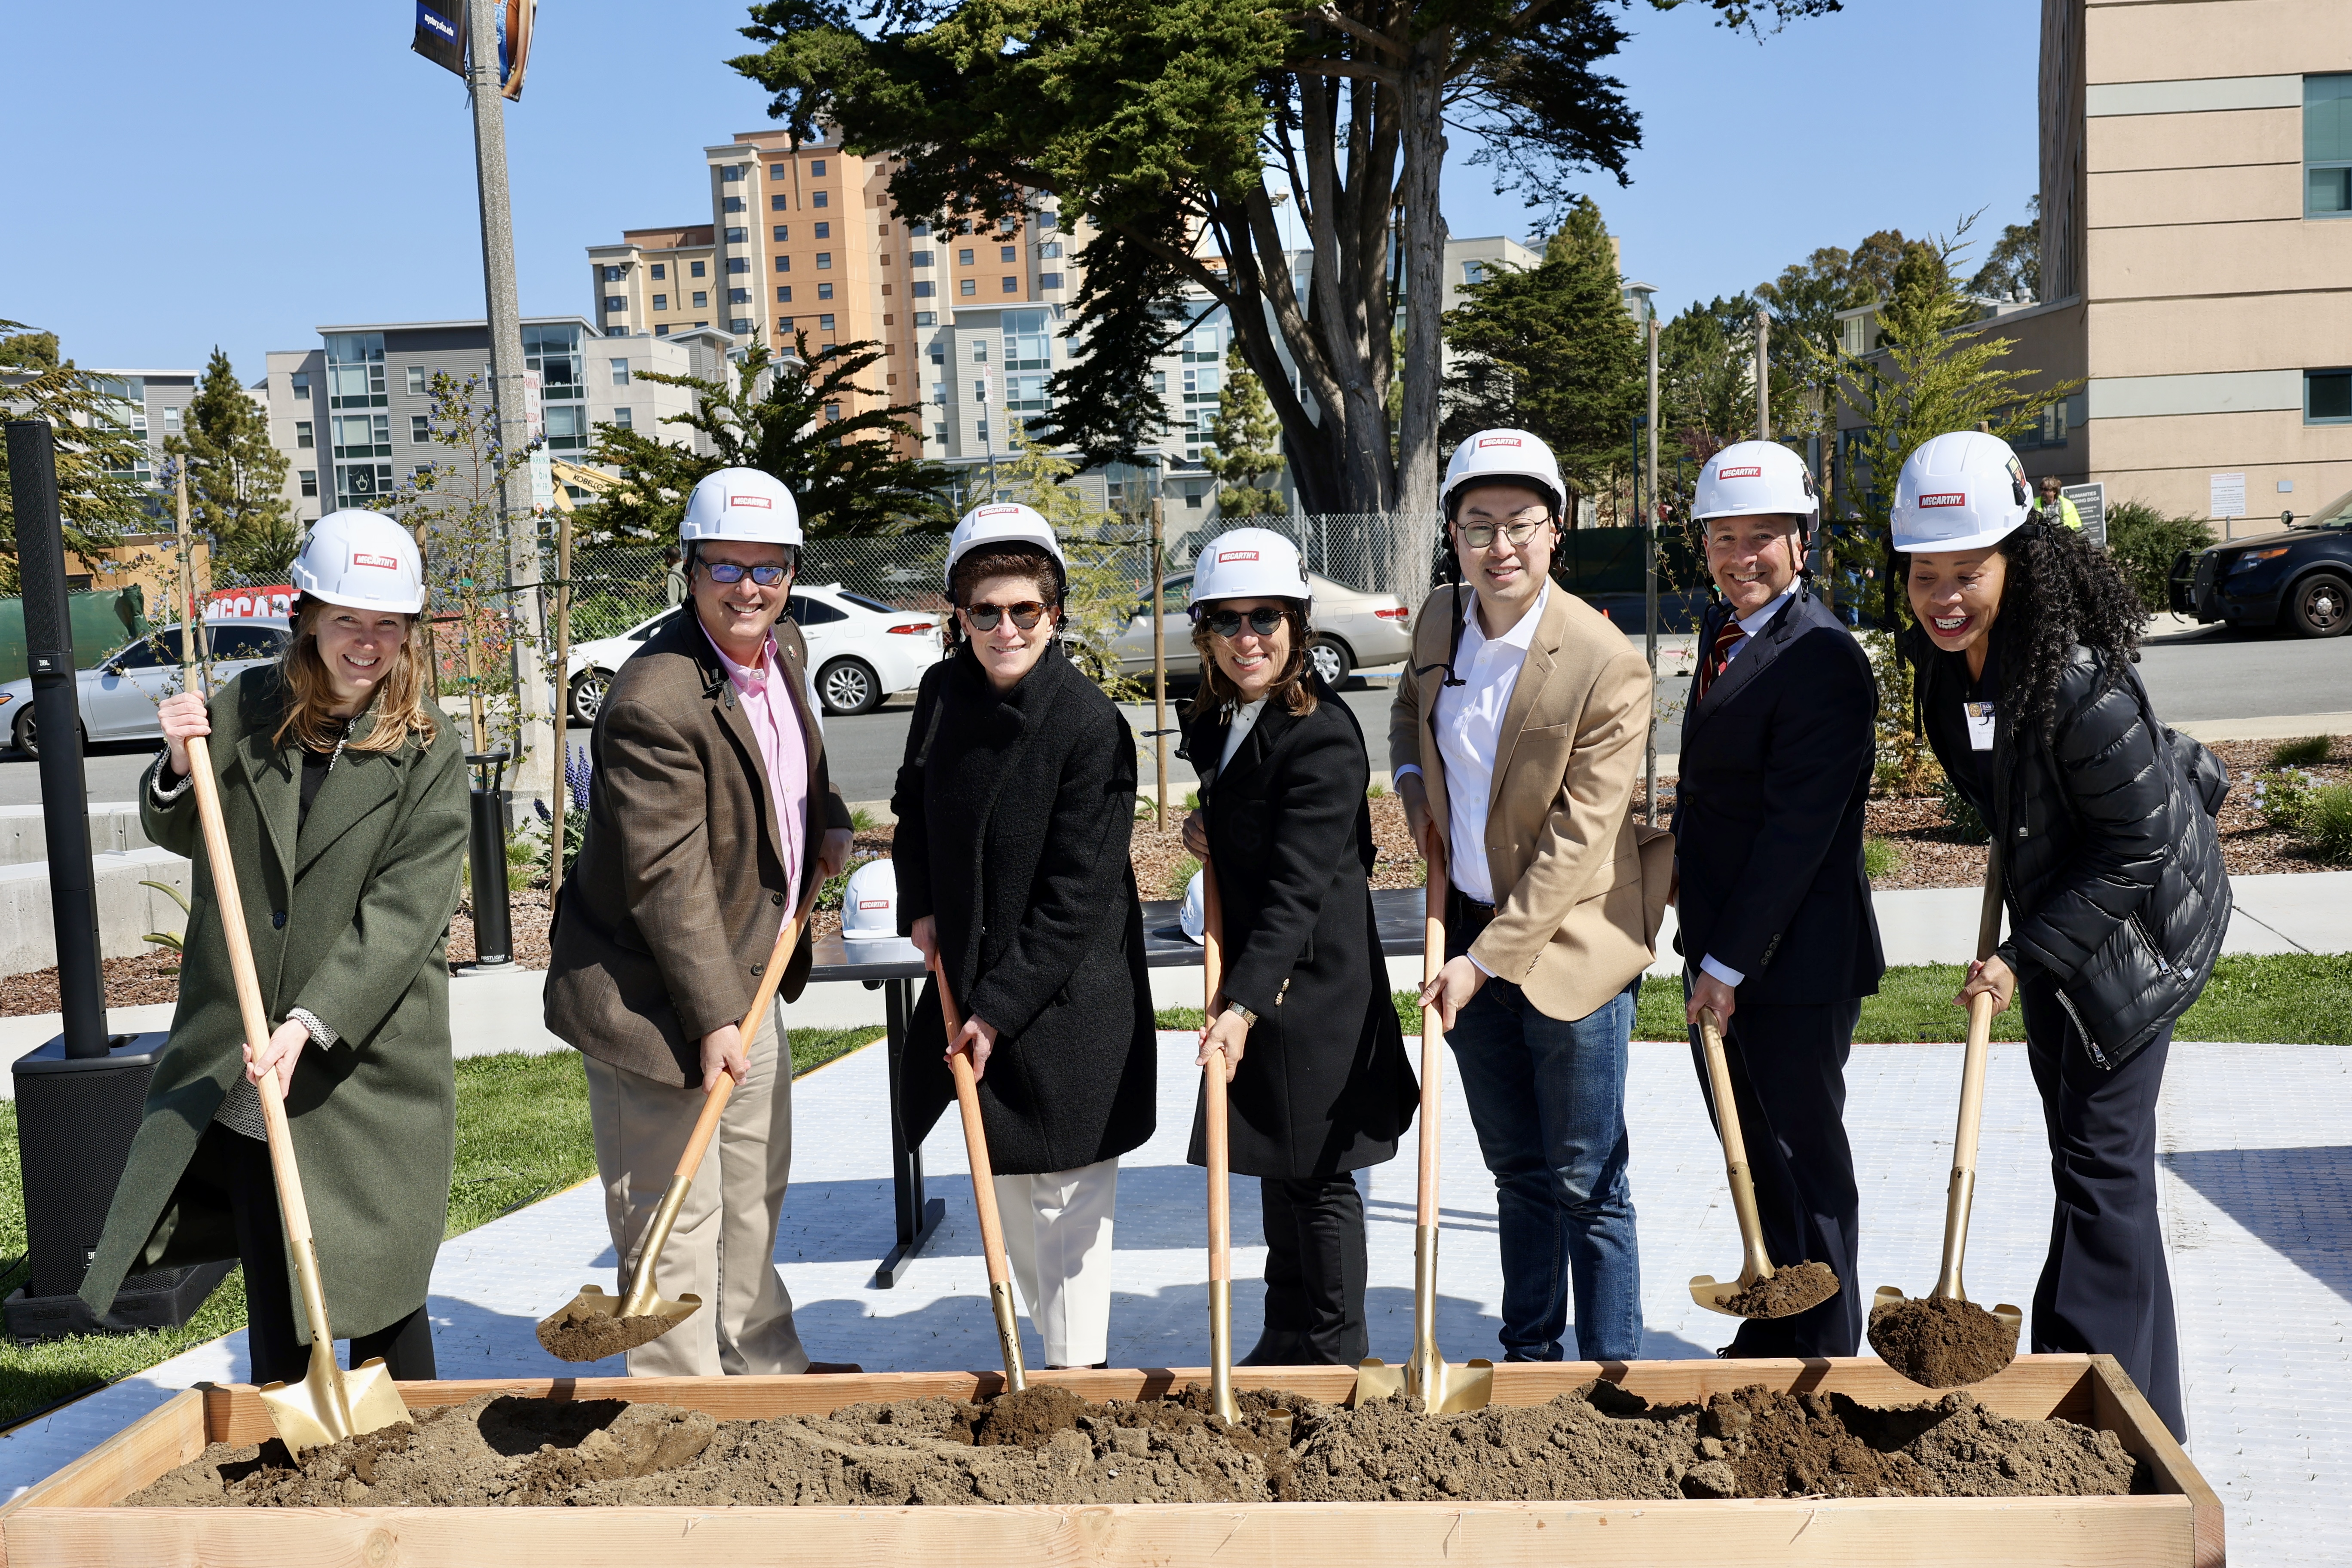 Image of Lt. Governor at SF State's groundbreaking for affordable student housing